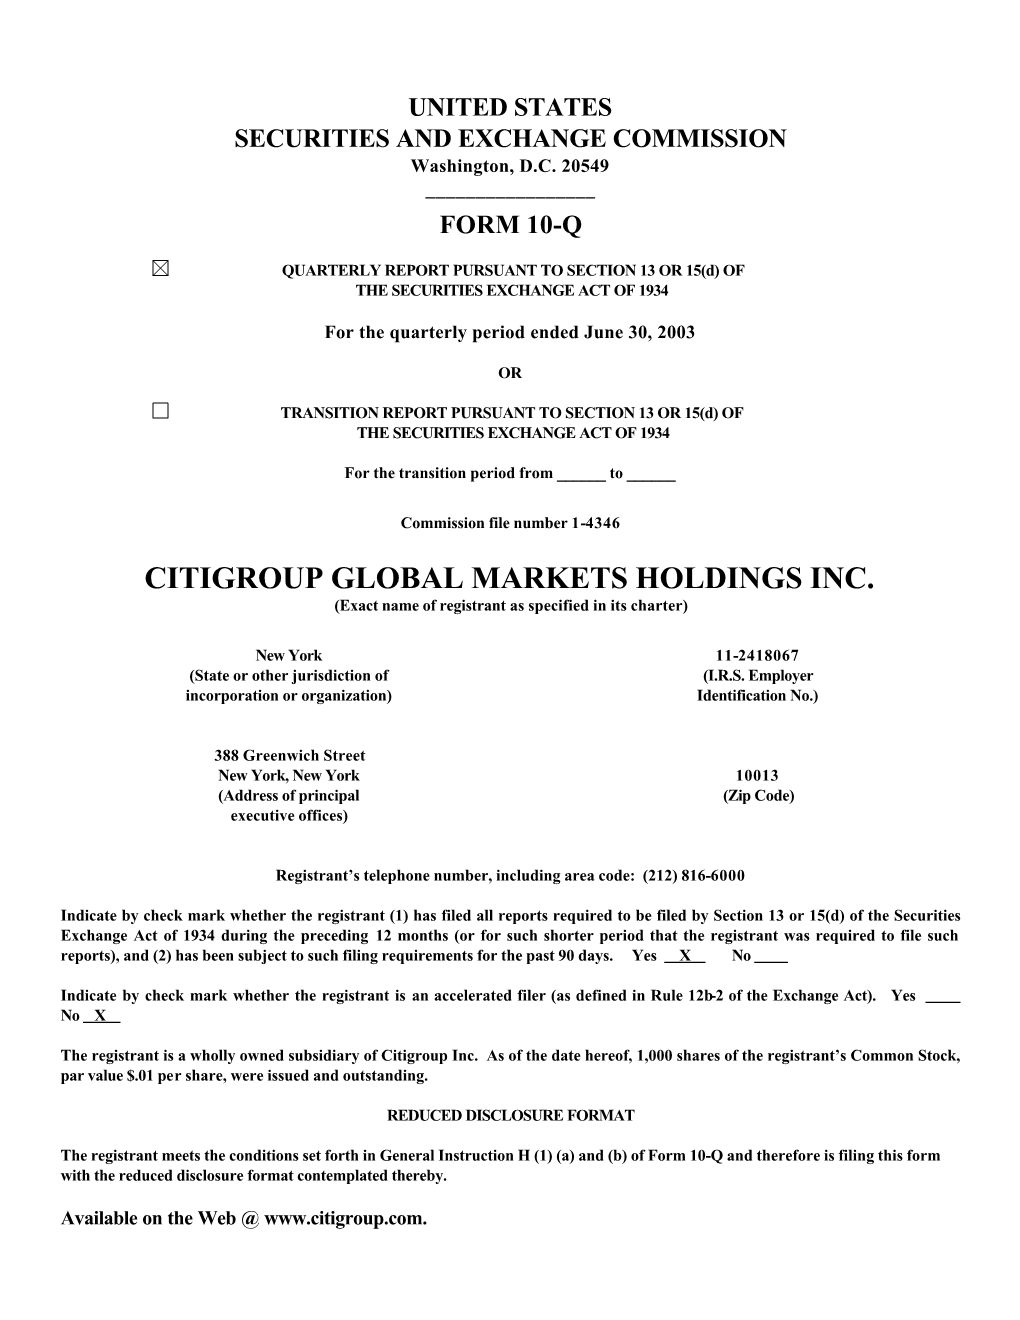 CITIGROUP GLOBAL MARKETS HOLDINGS INC. (Exact Name of Registrant As Specified in Its Charter)